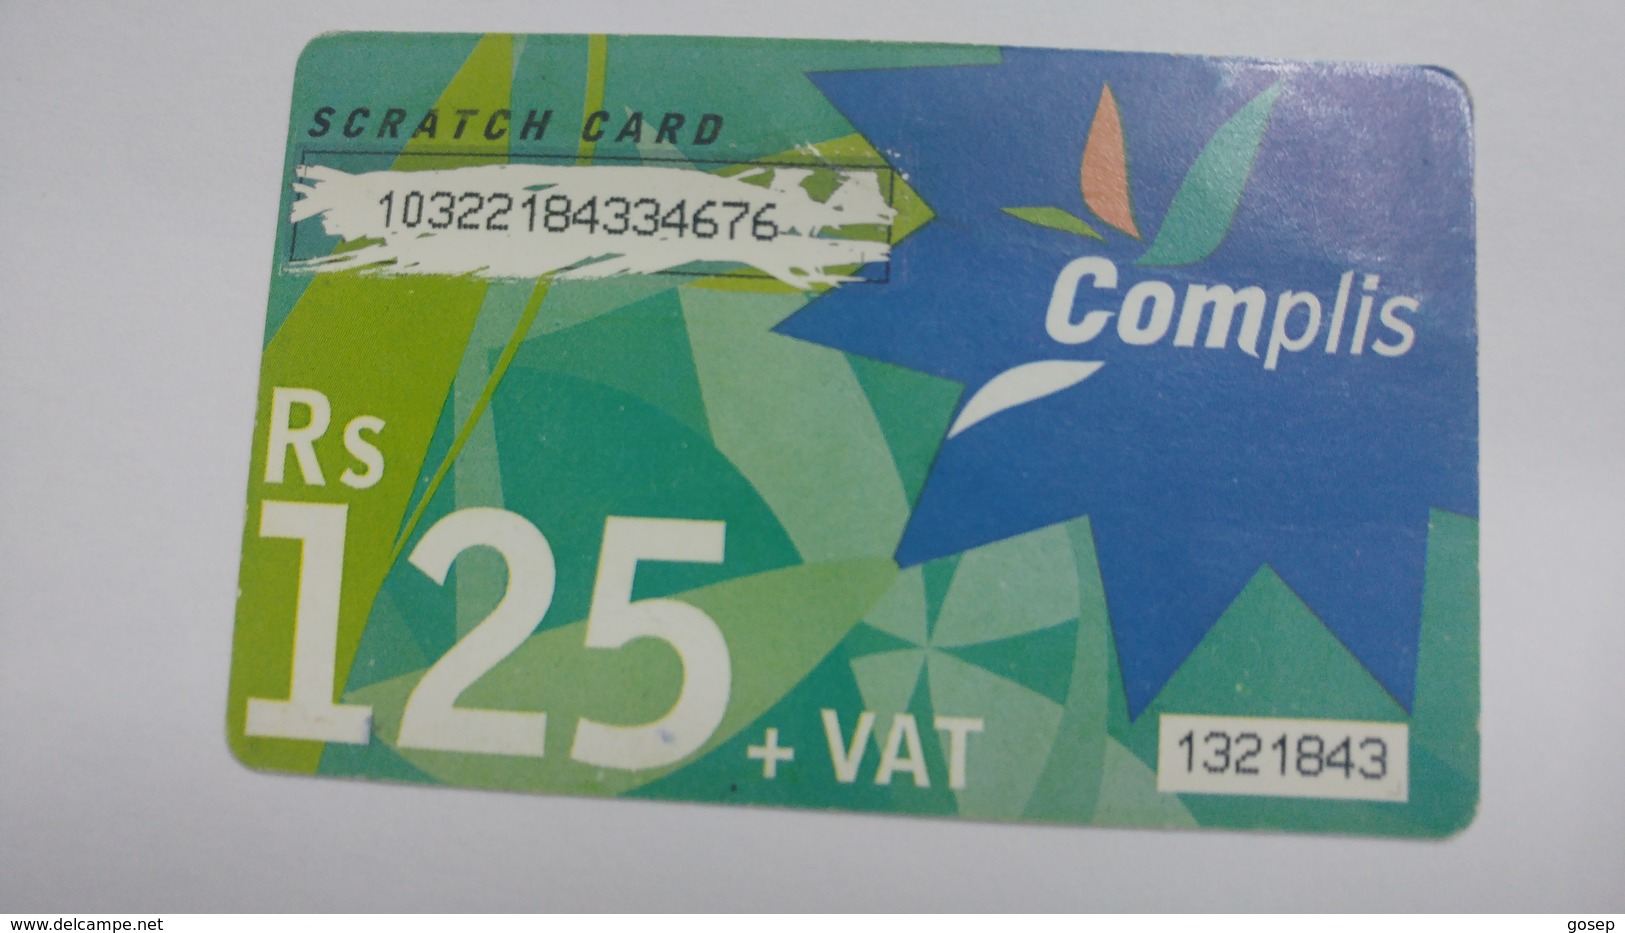 Mauritius-scratch Card-complis-(rs125+vat)-used Card+1card Prepiad Free - Maurice